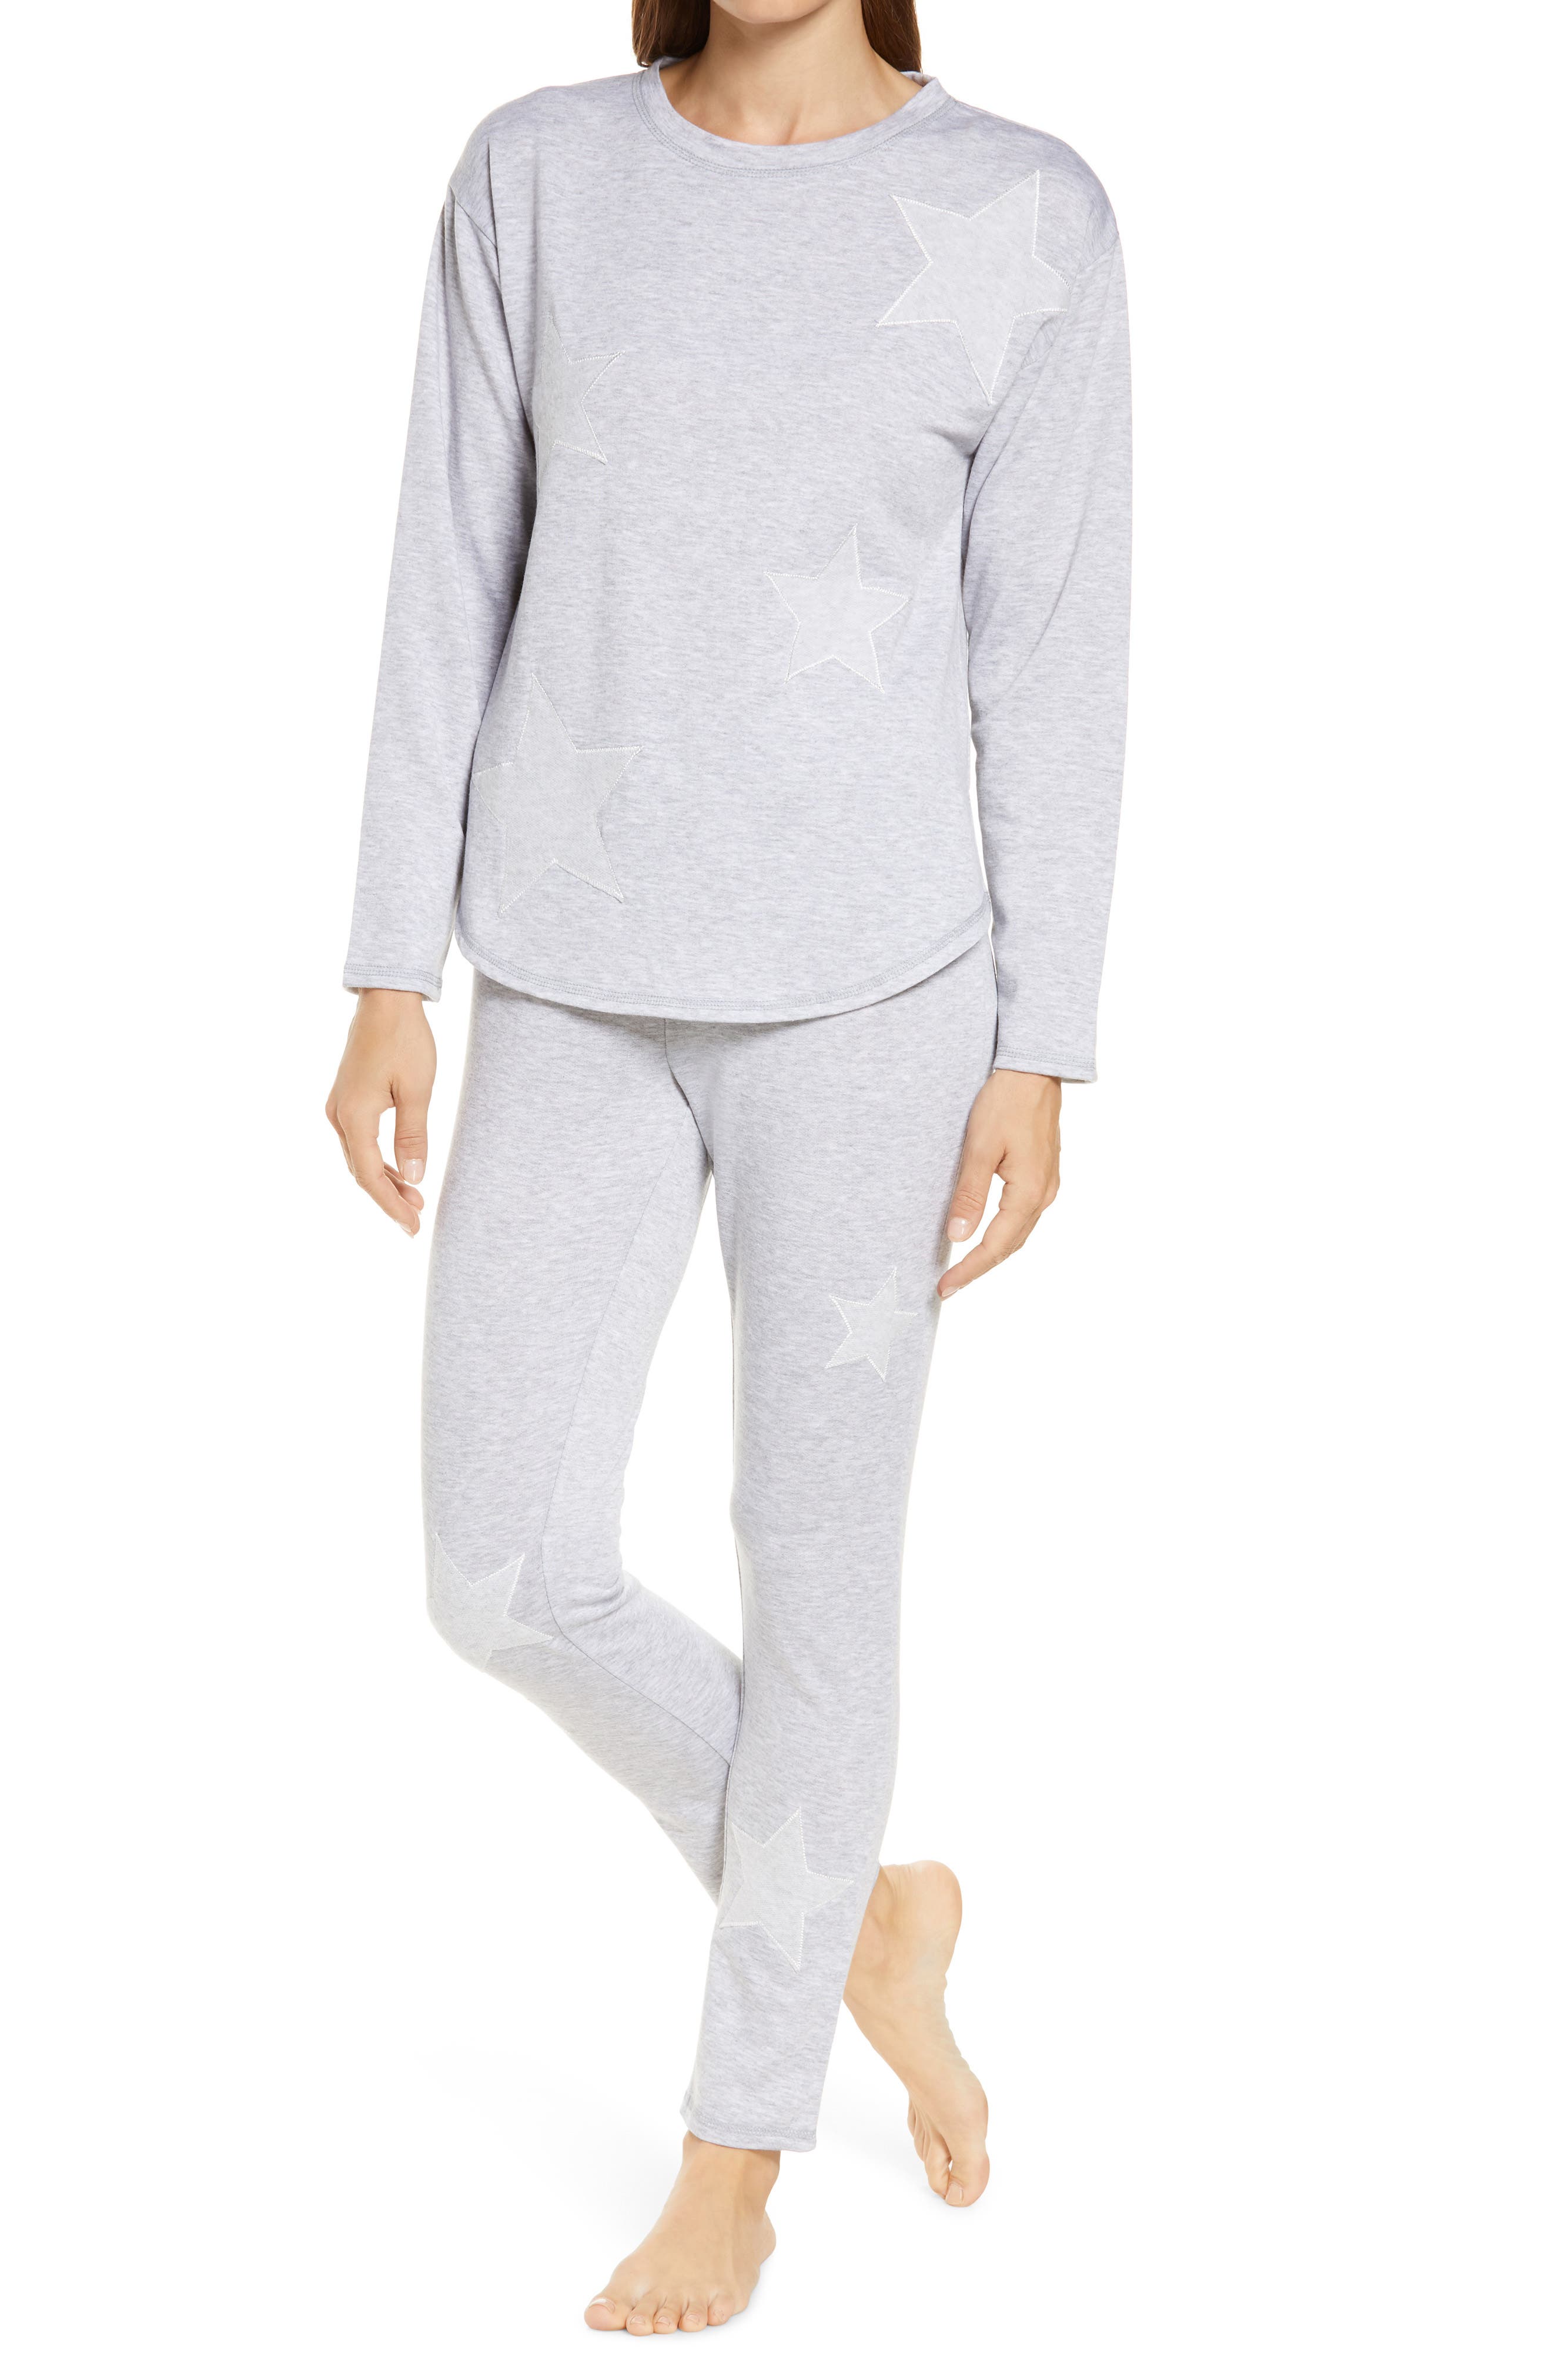 Emerson Road Star Brushed Pajamas in Heather Gray at Nordstrom